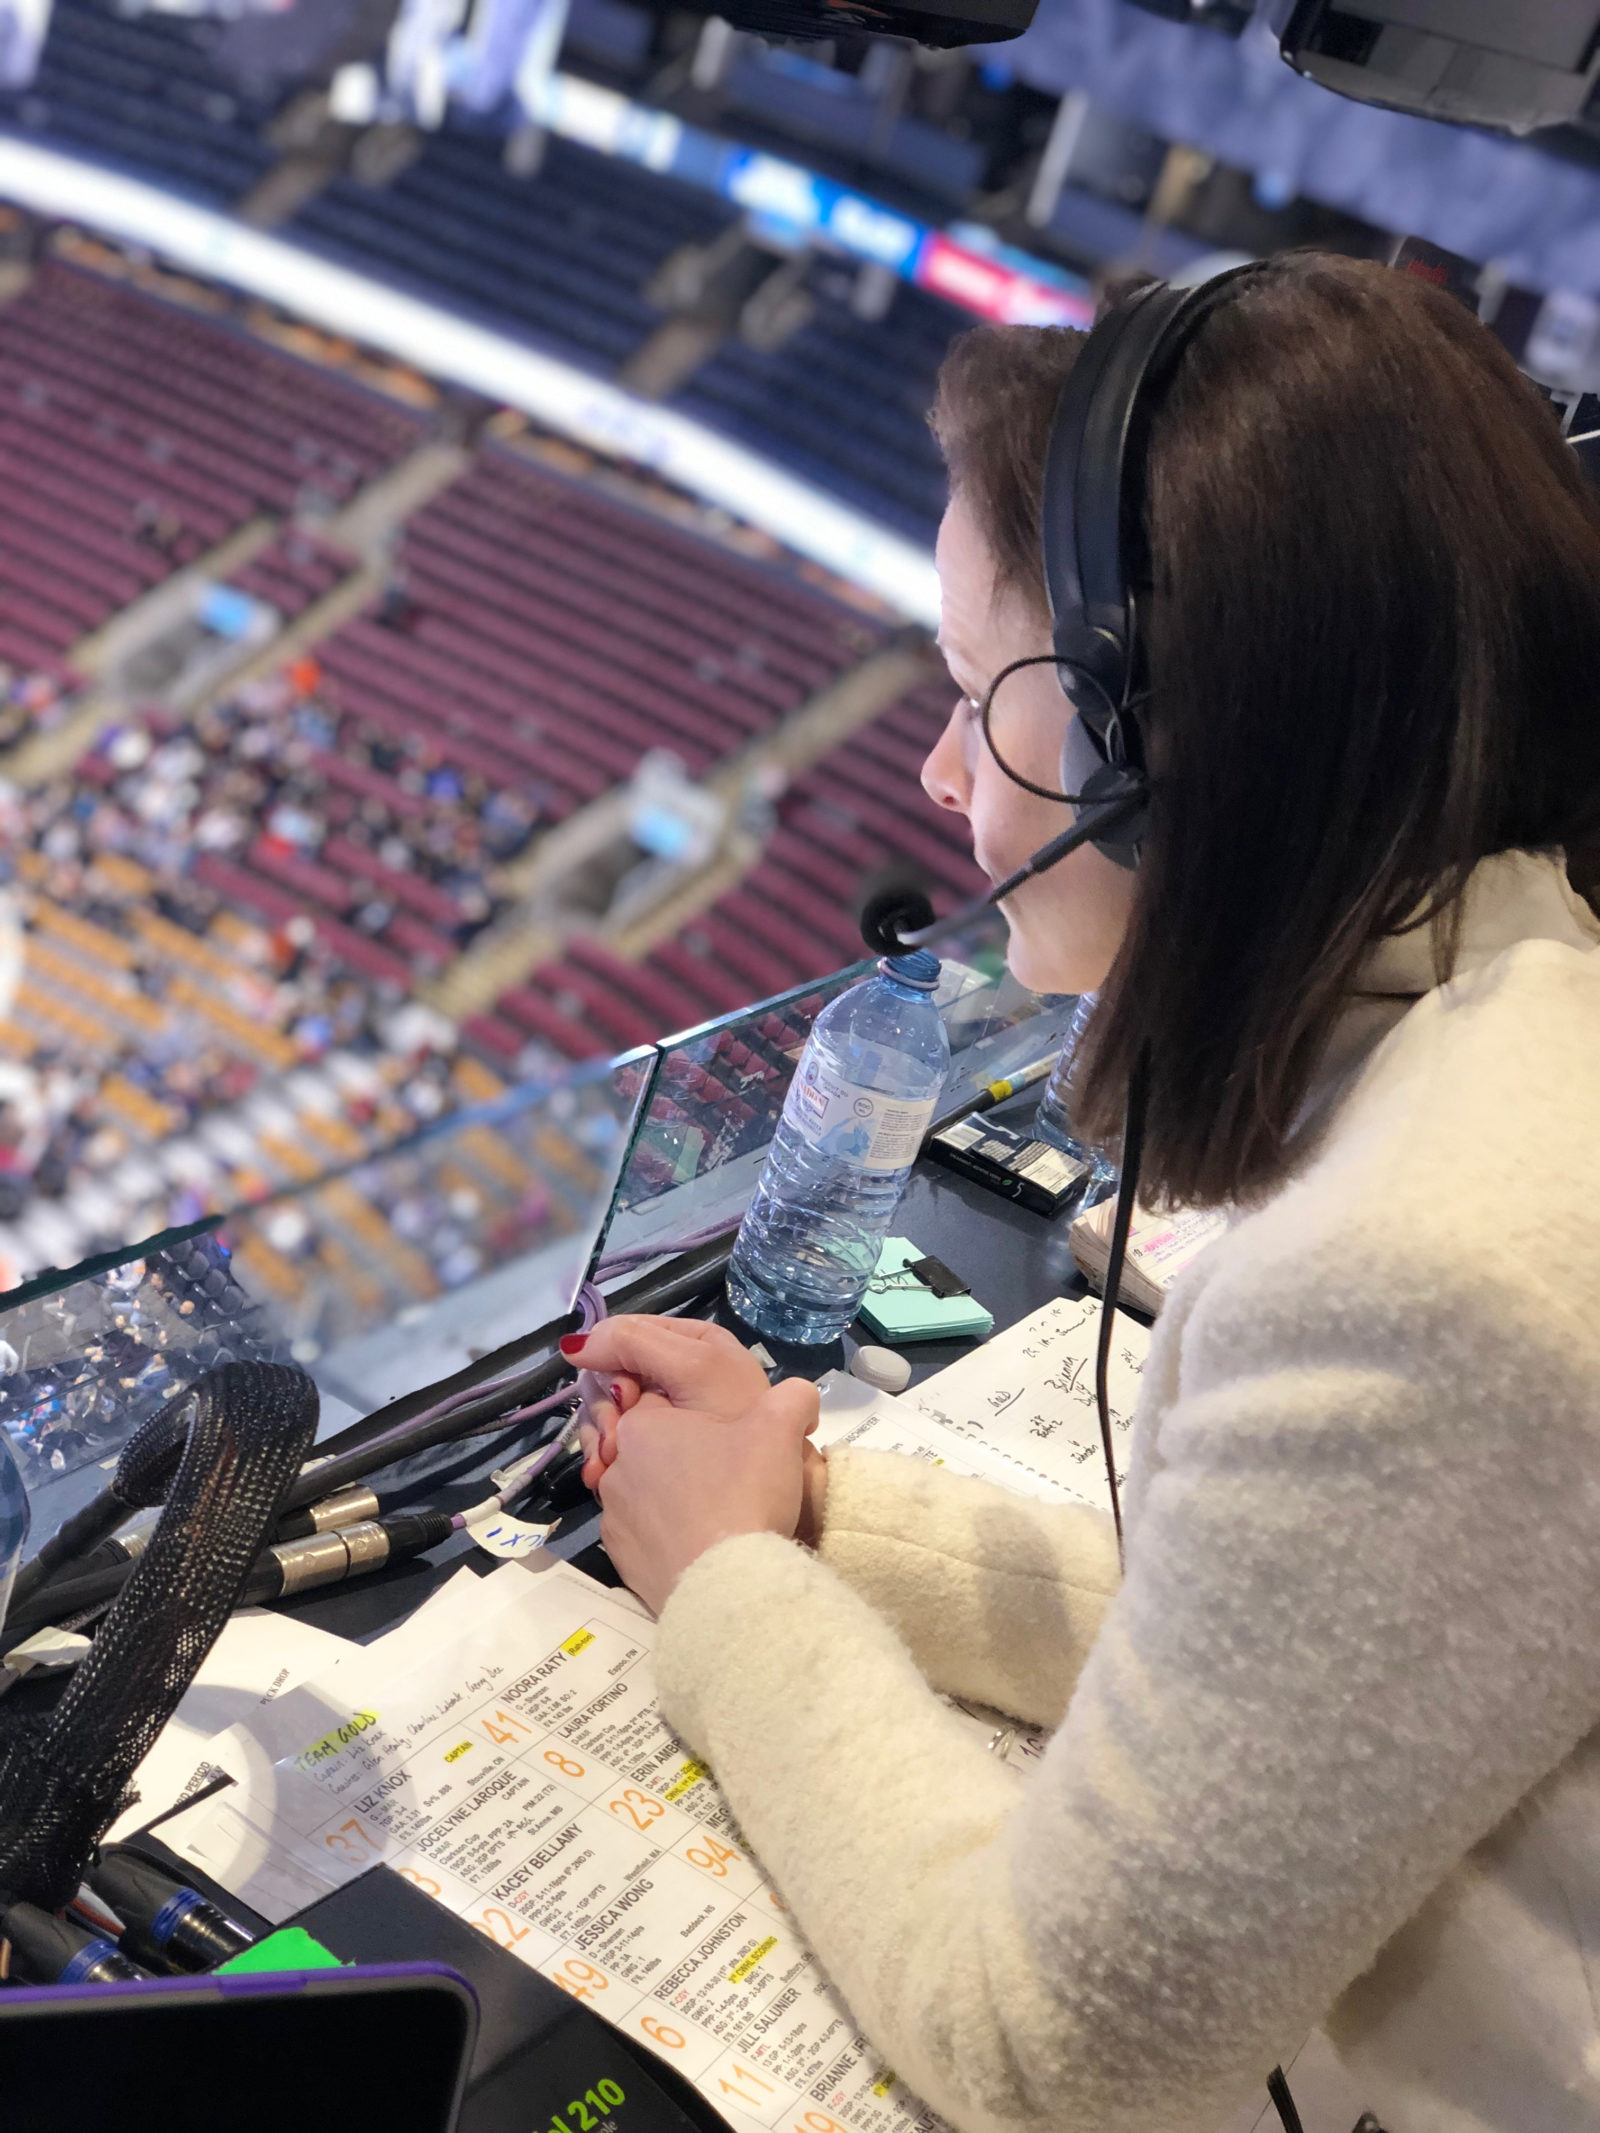 Inside The Booth: A Look At The Hockey Announcer's Work Space